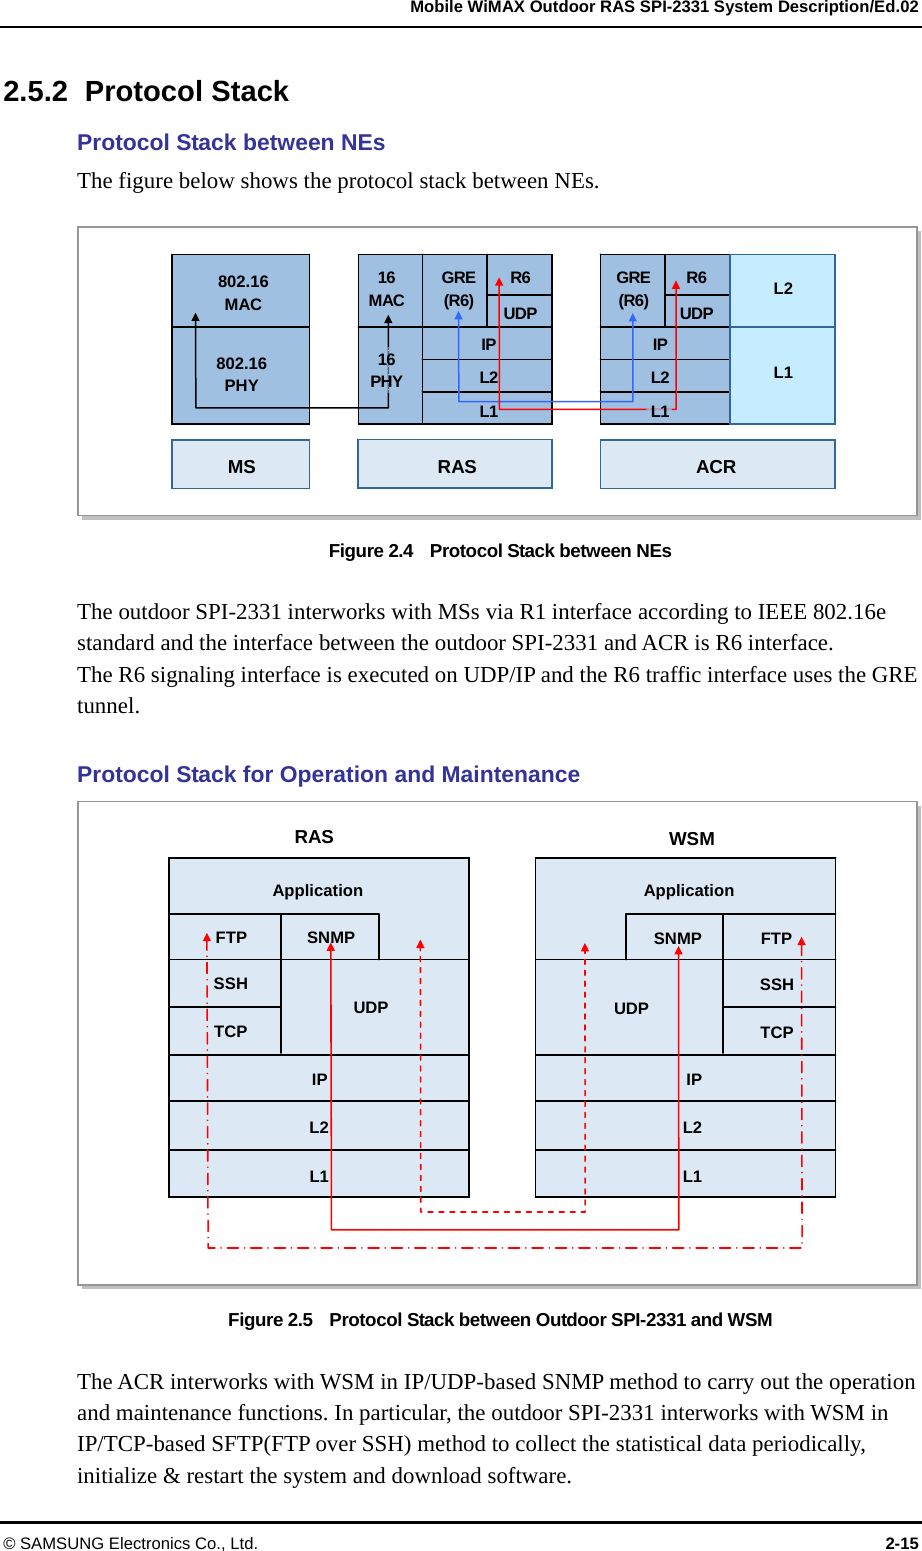   Mobile WiMAX Outdoor RAS SPI-2331 System Description/Ed.02 © SAMSUNG Electronics Co., Ltd.  2-15 2.5.2 Protocol Stack Protocol Stack between NEs   The figure below shows the protocol stack between NEs.  Figure 2.4    Protocol Stack between NEs  The outdoor SPI-2331 interworks with MSs via R1 interface according to IEEE 802.16e standard and the interface between the outdoor SPI-2331 and ACR is R6 interface.   The R6 signaling interface is executed on UDP/IP and the R6 traffic interface uses the GRE tunnel.   Protocol Stack for Operation and Maintenance Figure 2.5    Protocol Stack between Outdoor SPI-2331 and WSM  The ACR interworks with WSM in IP/UDP-based SNMP method to carry out the operation and maintenance functions. In particular, the outdoor SPI-2331 interworks with WSM in IP/TCP-based SFTP(FTP over SSH) method to collect the statistical data periodically, initialize &amp; restart the system and download software. 16PHY802.16   MAC 802.16   PHY 16 MACGRE(R6) R6UDPIPL2L1MS RASACR GRE(R6) R6 UDP L2 L1 IPL2L116 PHY WSMRAS IP ApplicationFTP TCP SSHFTP TCP SSHL2 IP Application SNMPUDP UDPSNMPL1 L2 L1 